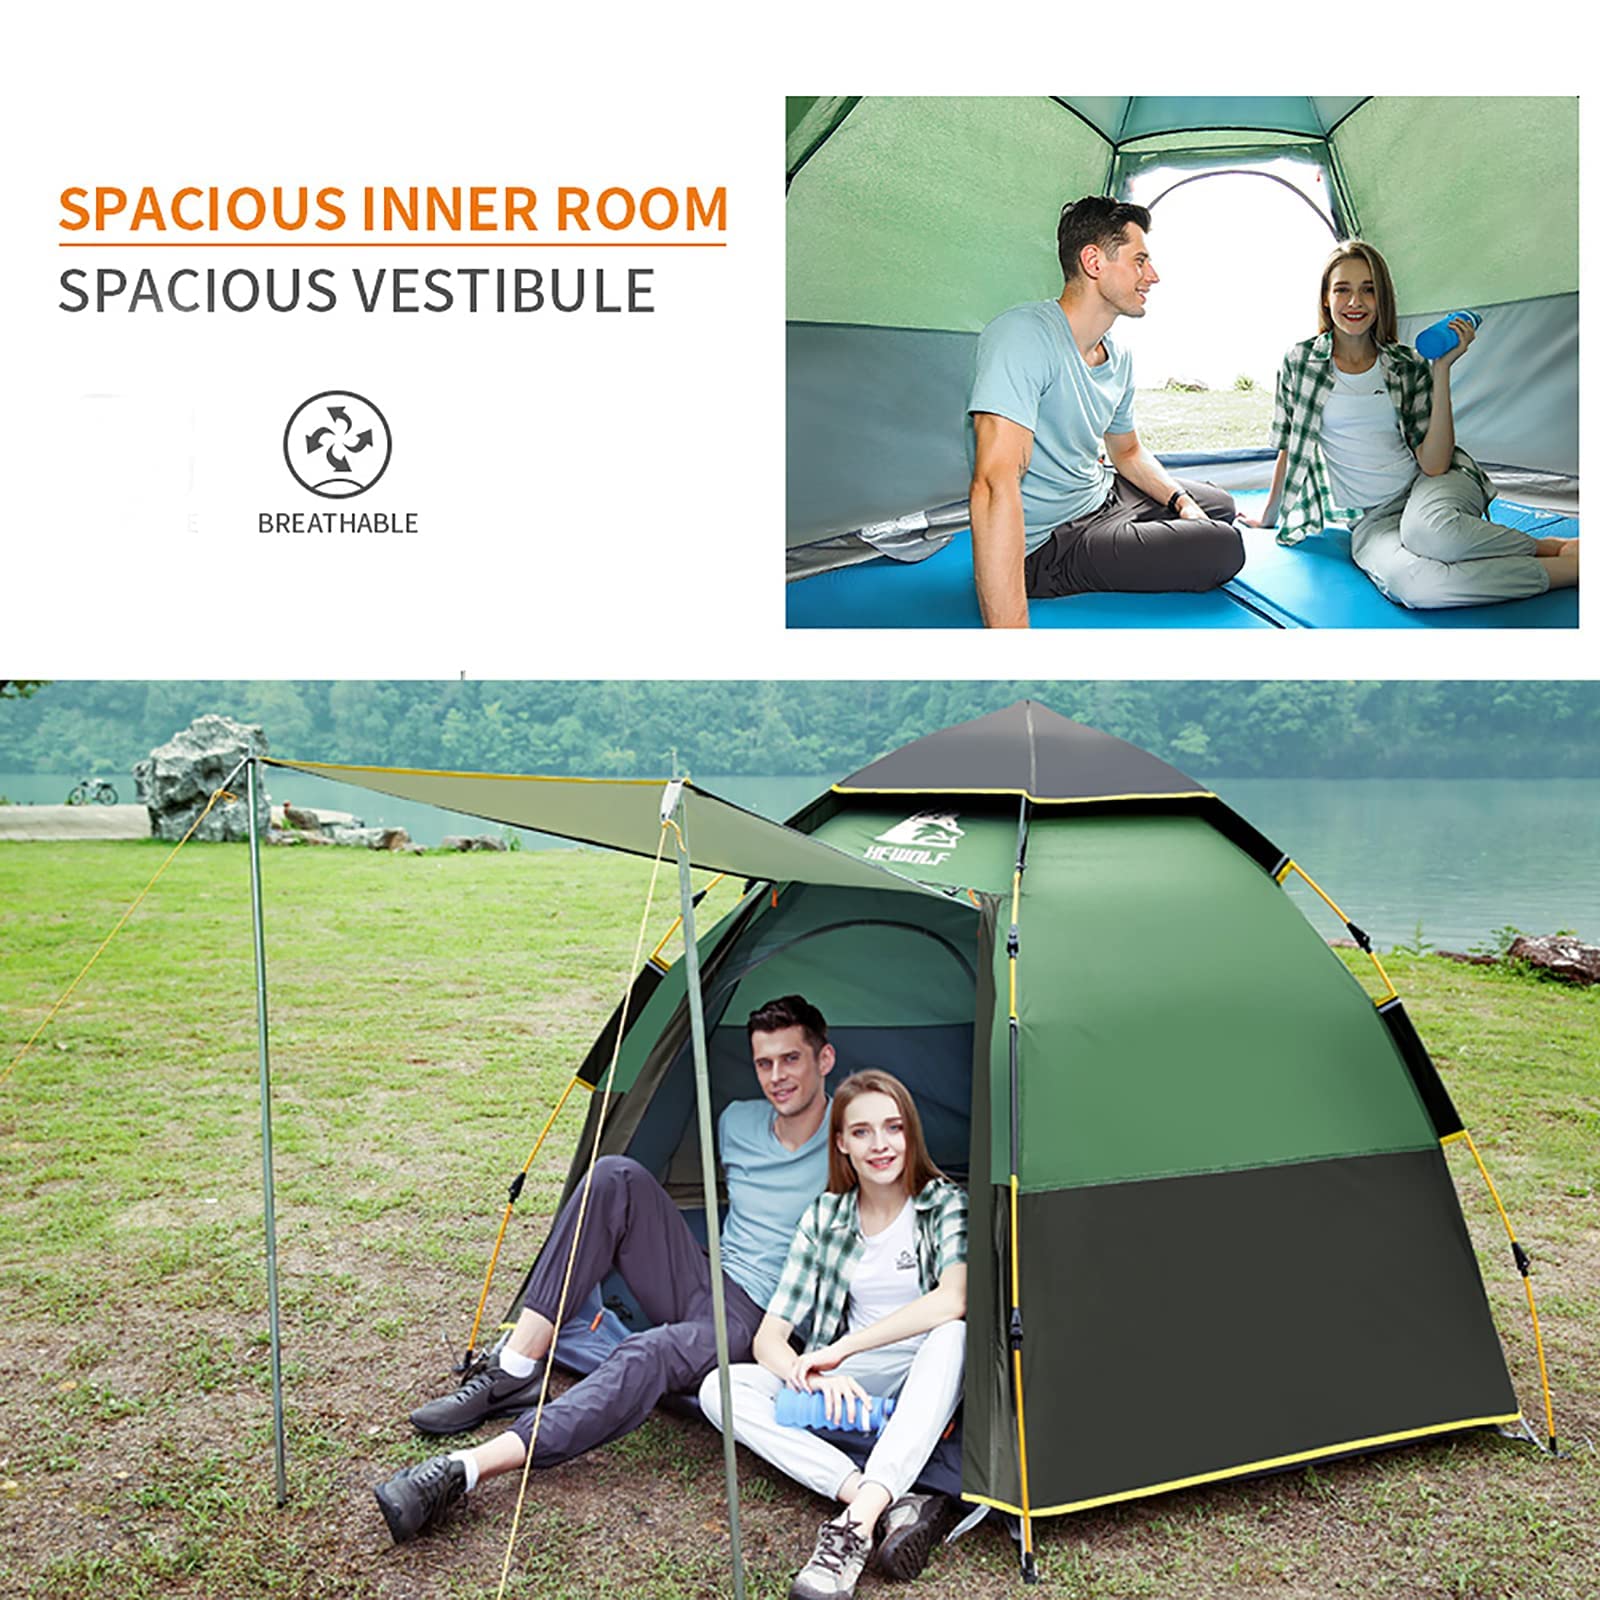 Hewolf Waterproof Instant Camping Tent - 2/3/4 Person Easy Quick Setup Dome Family Tents for Camping,Double Layer Flysheet Can b